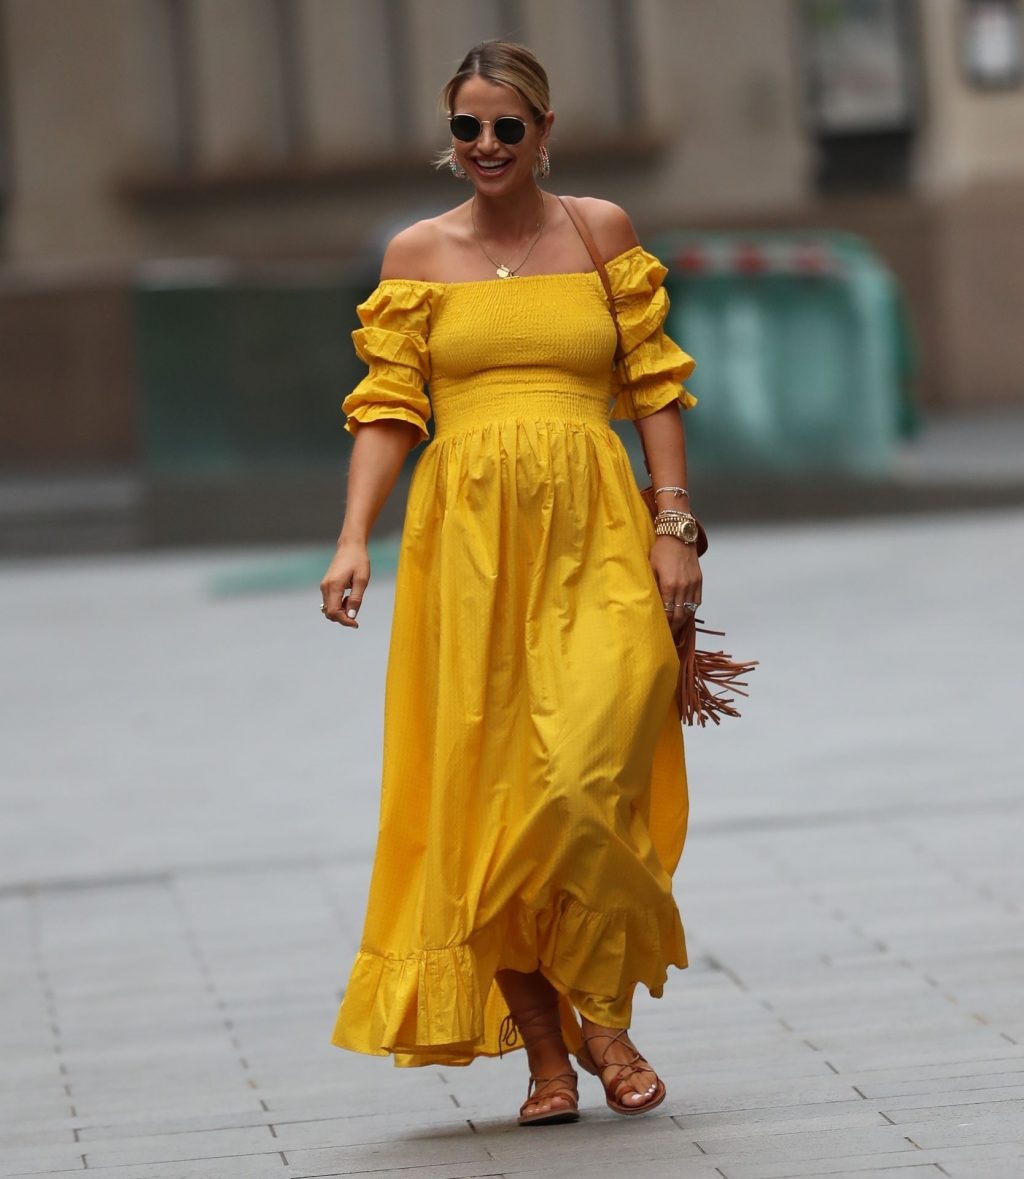 Vogue Williams Is Pictured Leaving Heart Radio Breakfast Show in a Yellow Dress (40 Photos)